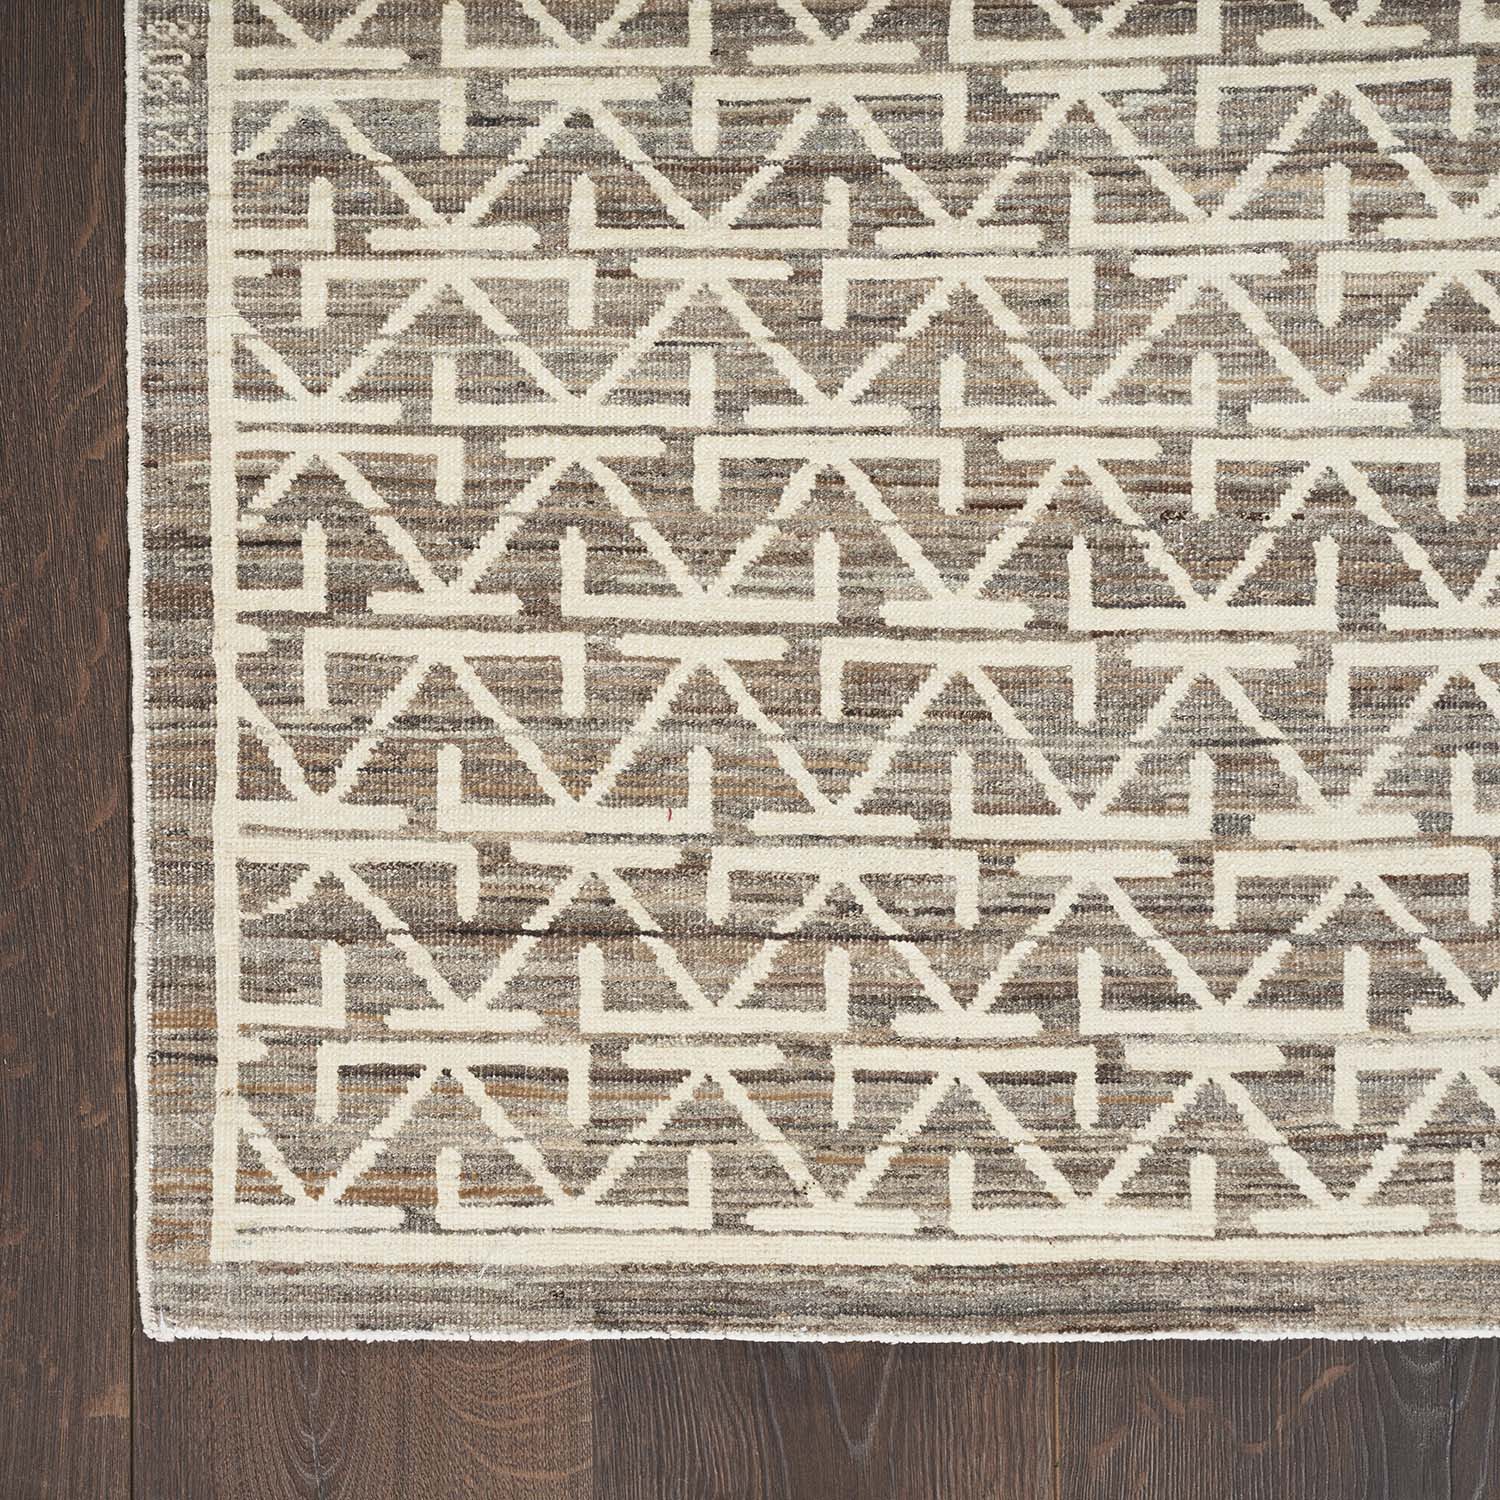 Geometric patterned rug adds elegance and style to wooden flooring.